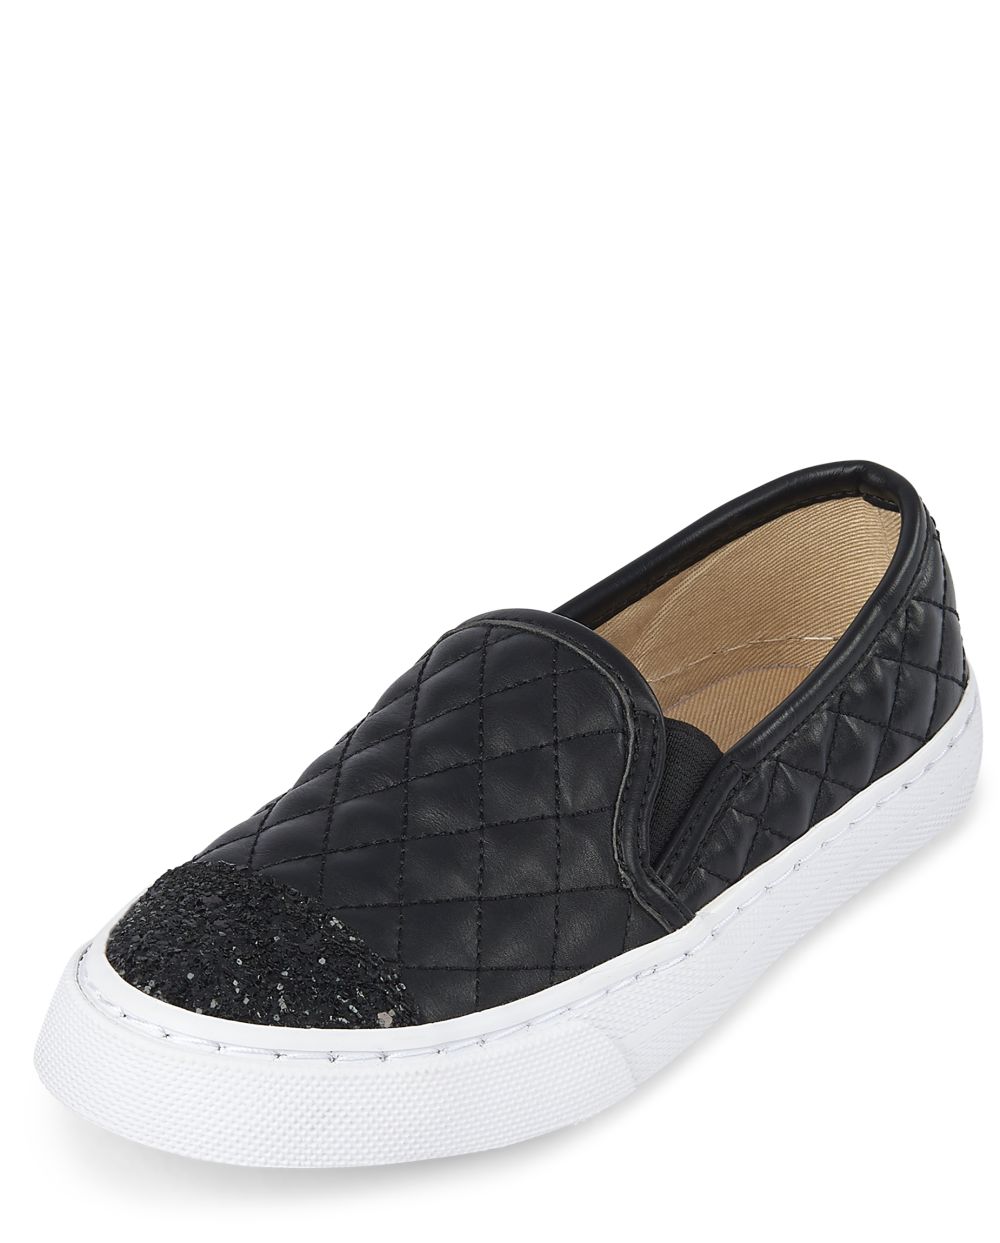 

Girls Uniform Glitter Quilted Slip On Sneakers - Black - The Children's Place